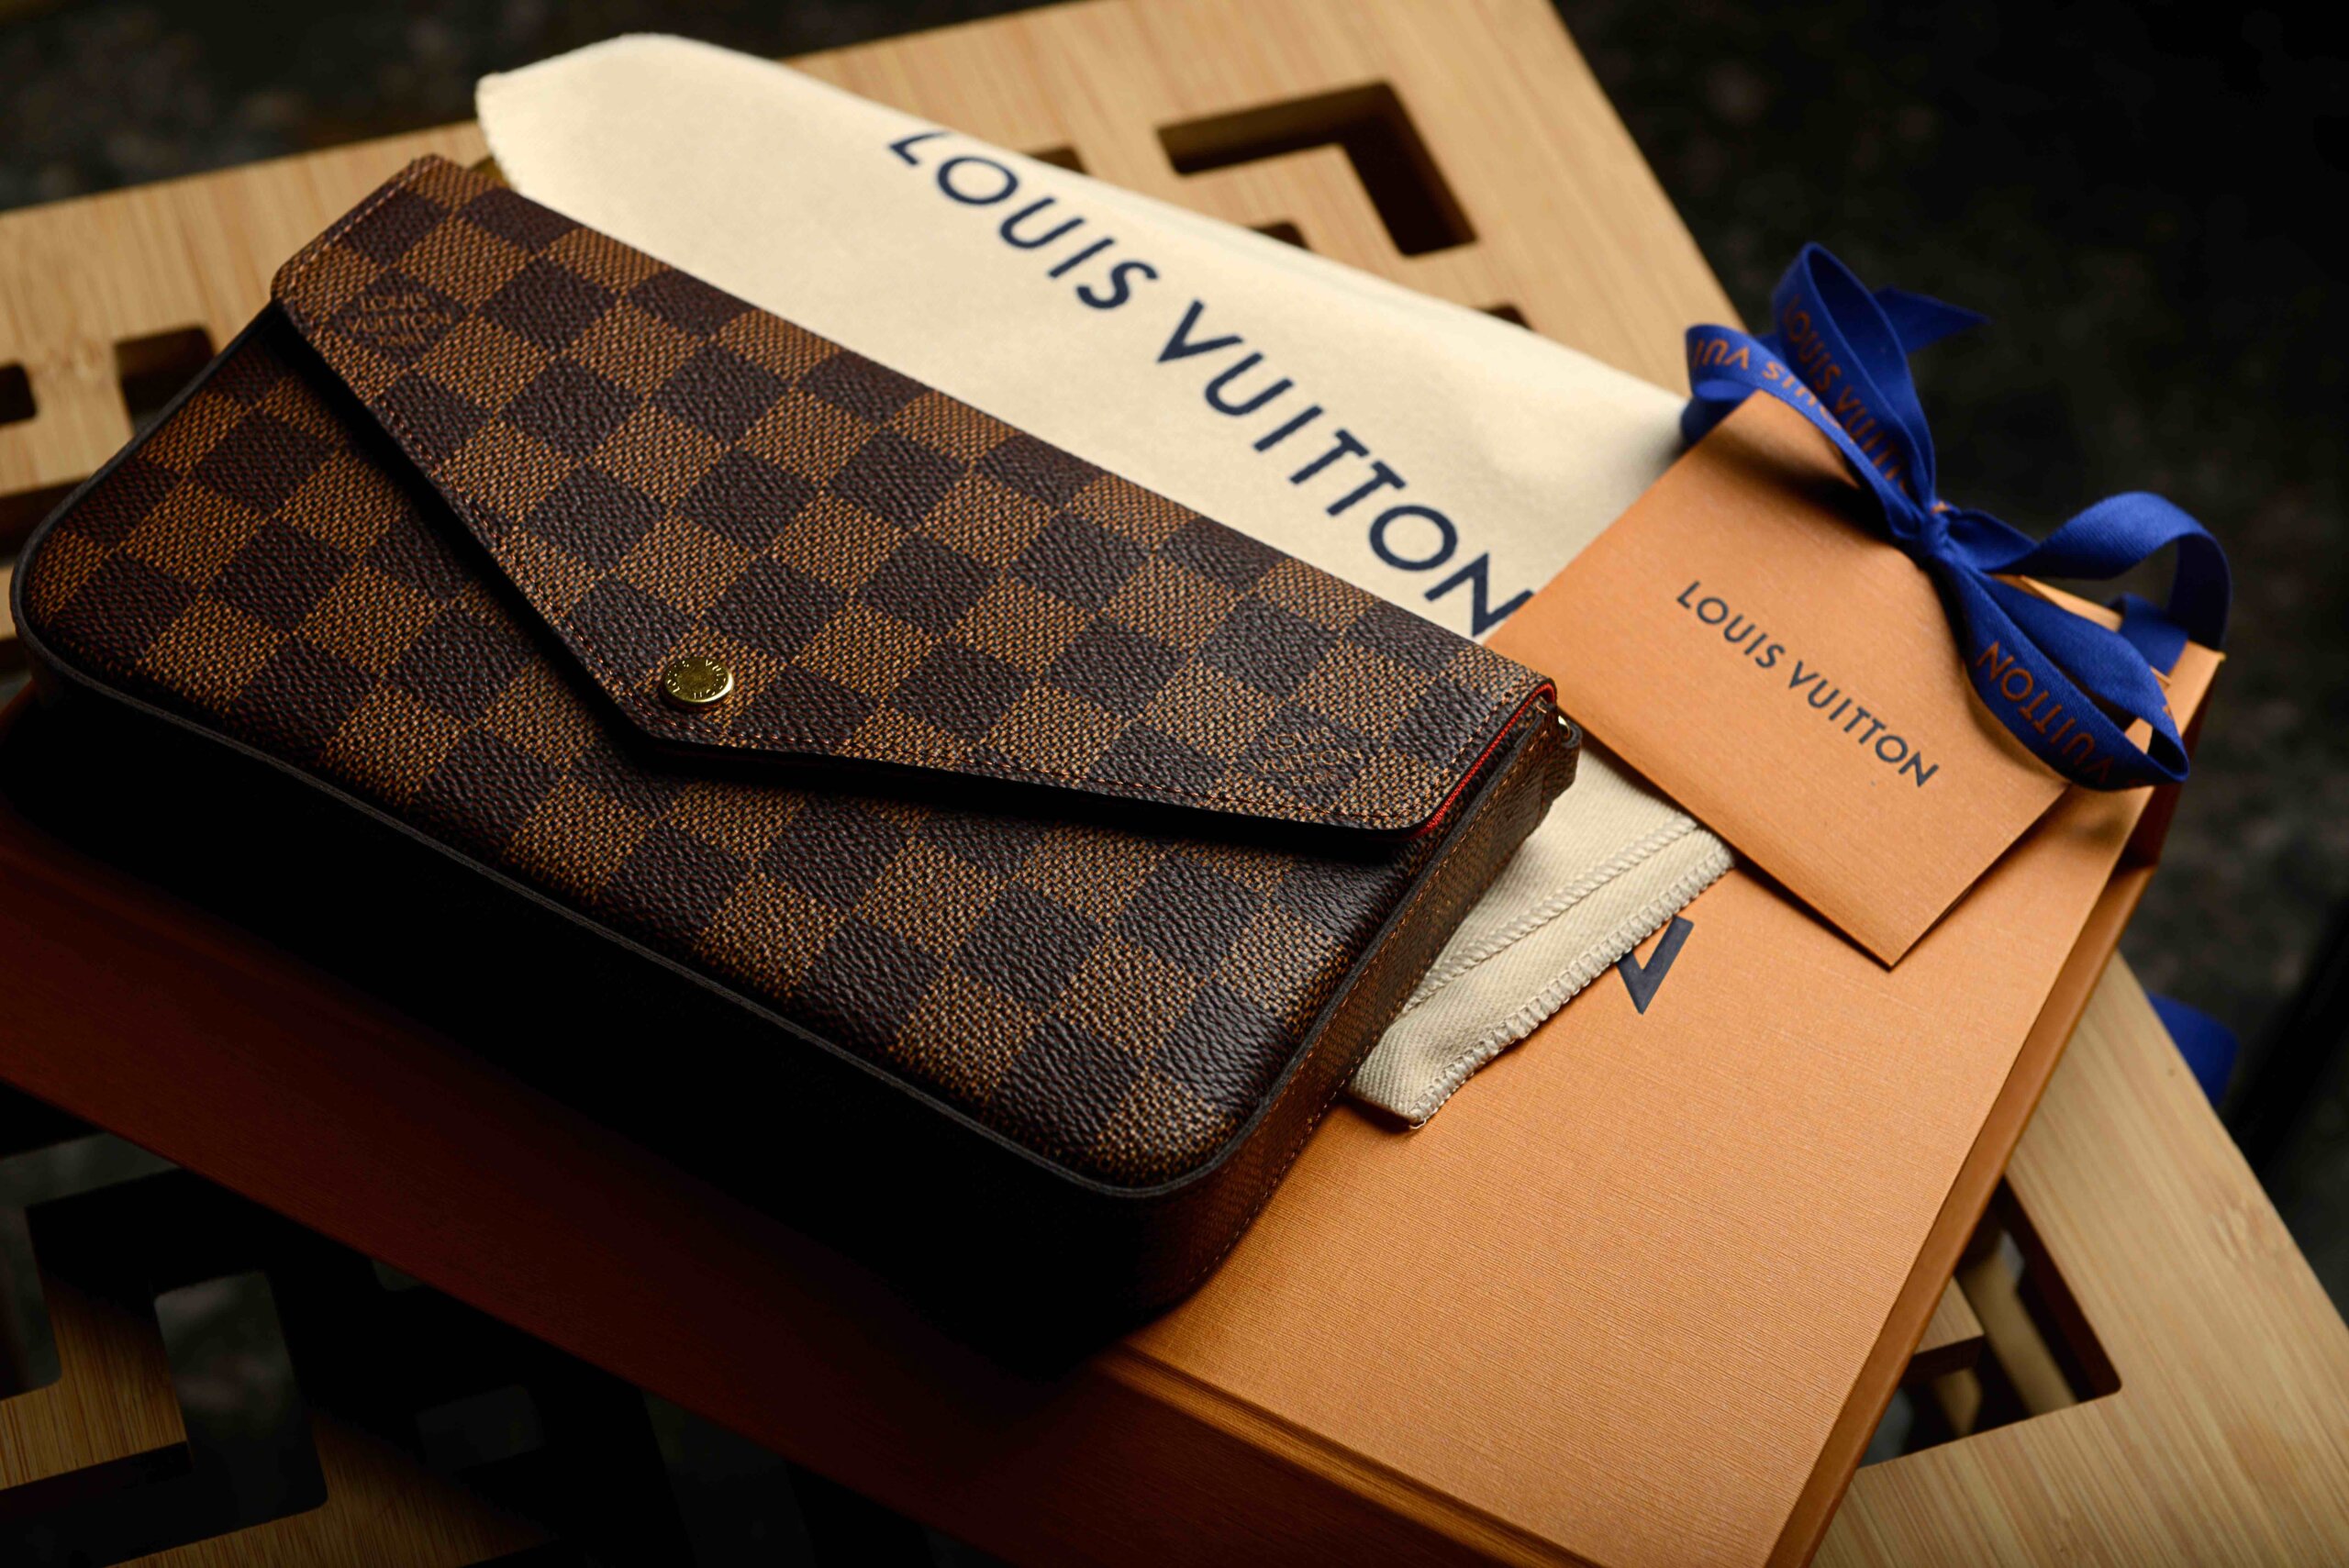 Creating a distinct visual language to share your brand story - Louis Vuitton brown woman hand bag.